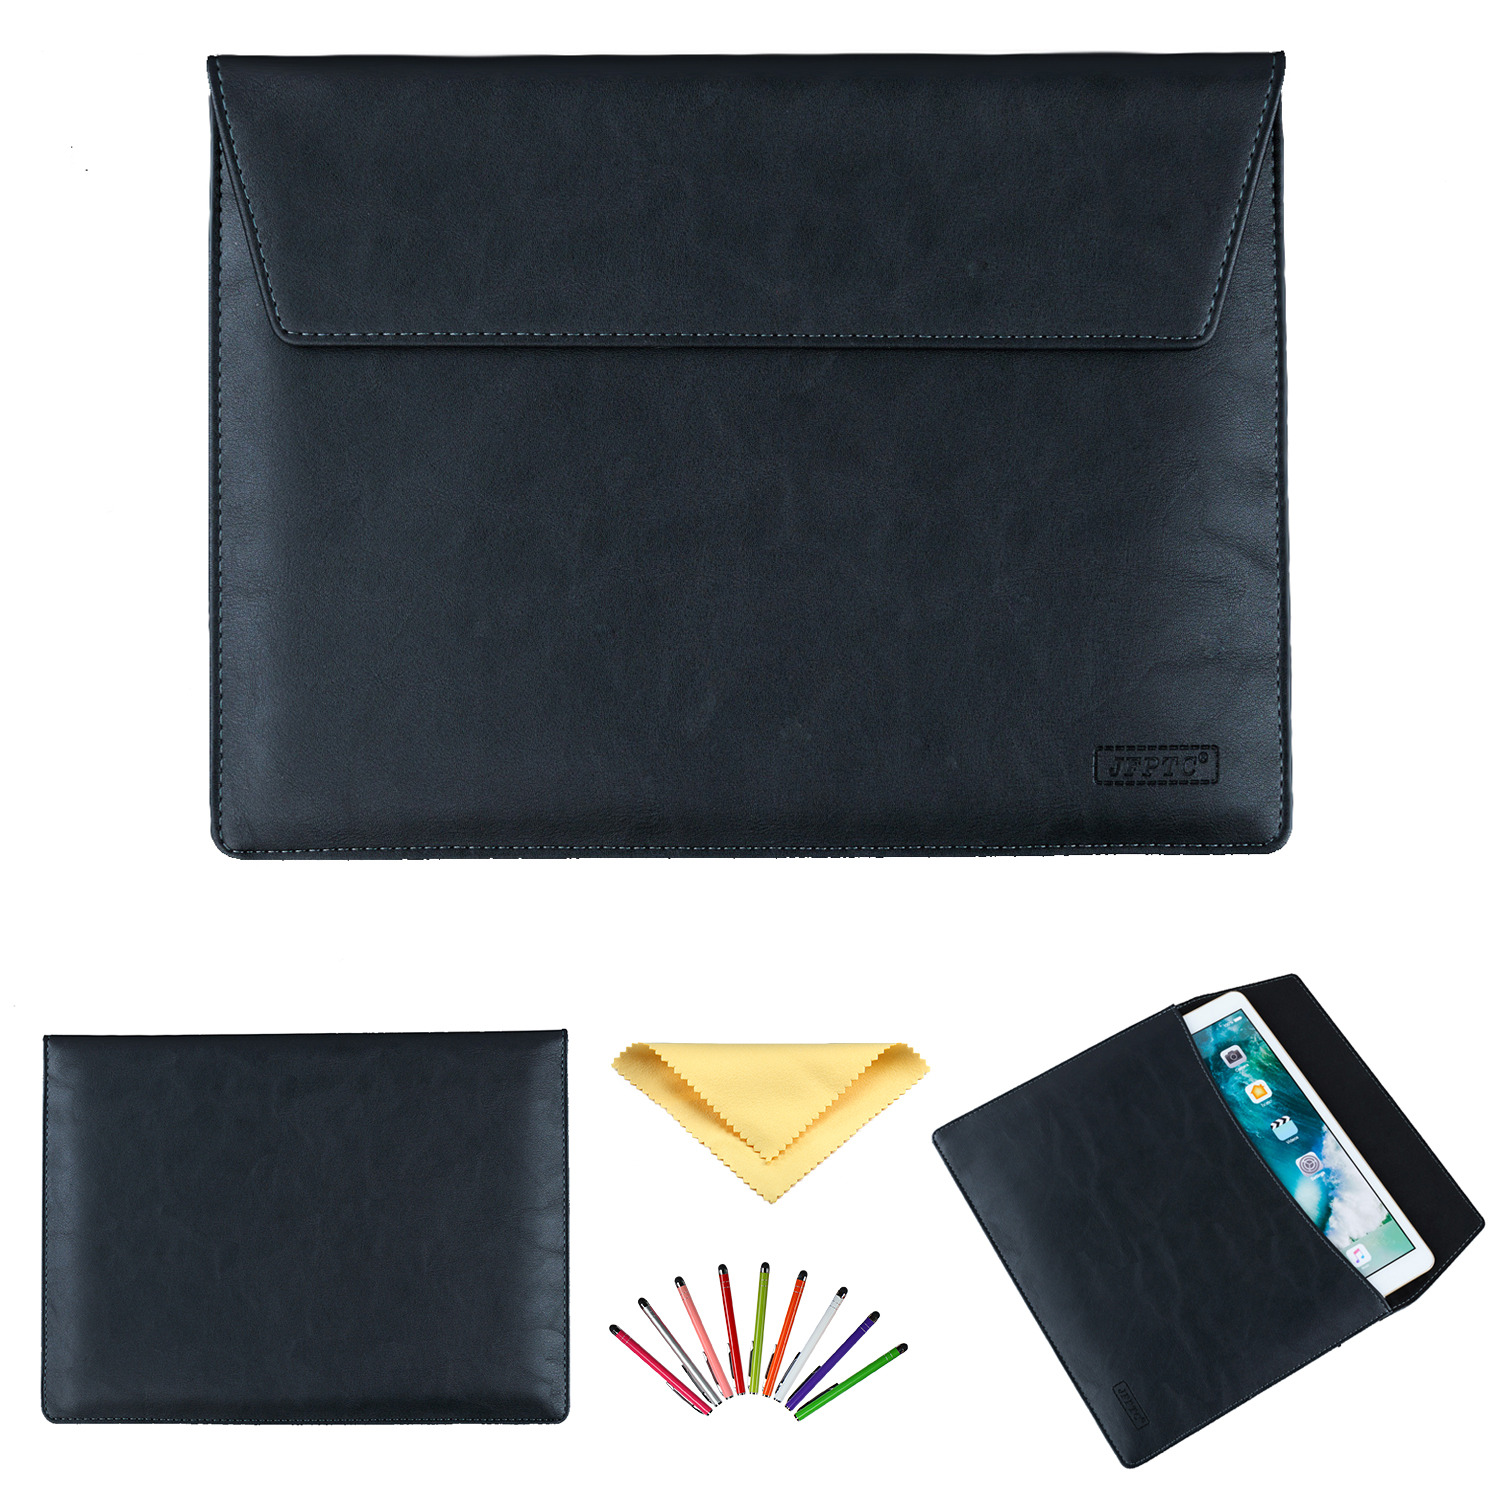 Soft PU Leather Sleeve Case Bag For 13 - 13.3 Inch Laptop/ Notebook/ MacBook/ Ultrabook/ Chromebook Computers (Apple/ Acer/ Asus/ Dell/ Fujitsu/ Lenovo/ HP/ Samsung/ Sony/ Toshiba etc), Black - image 1 of 6